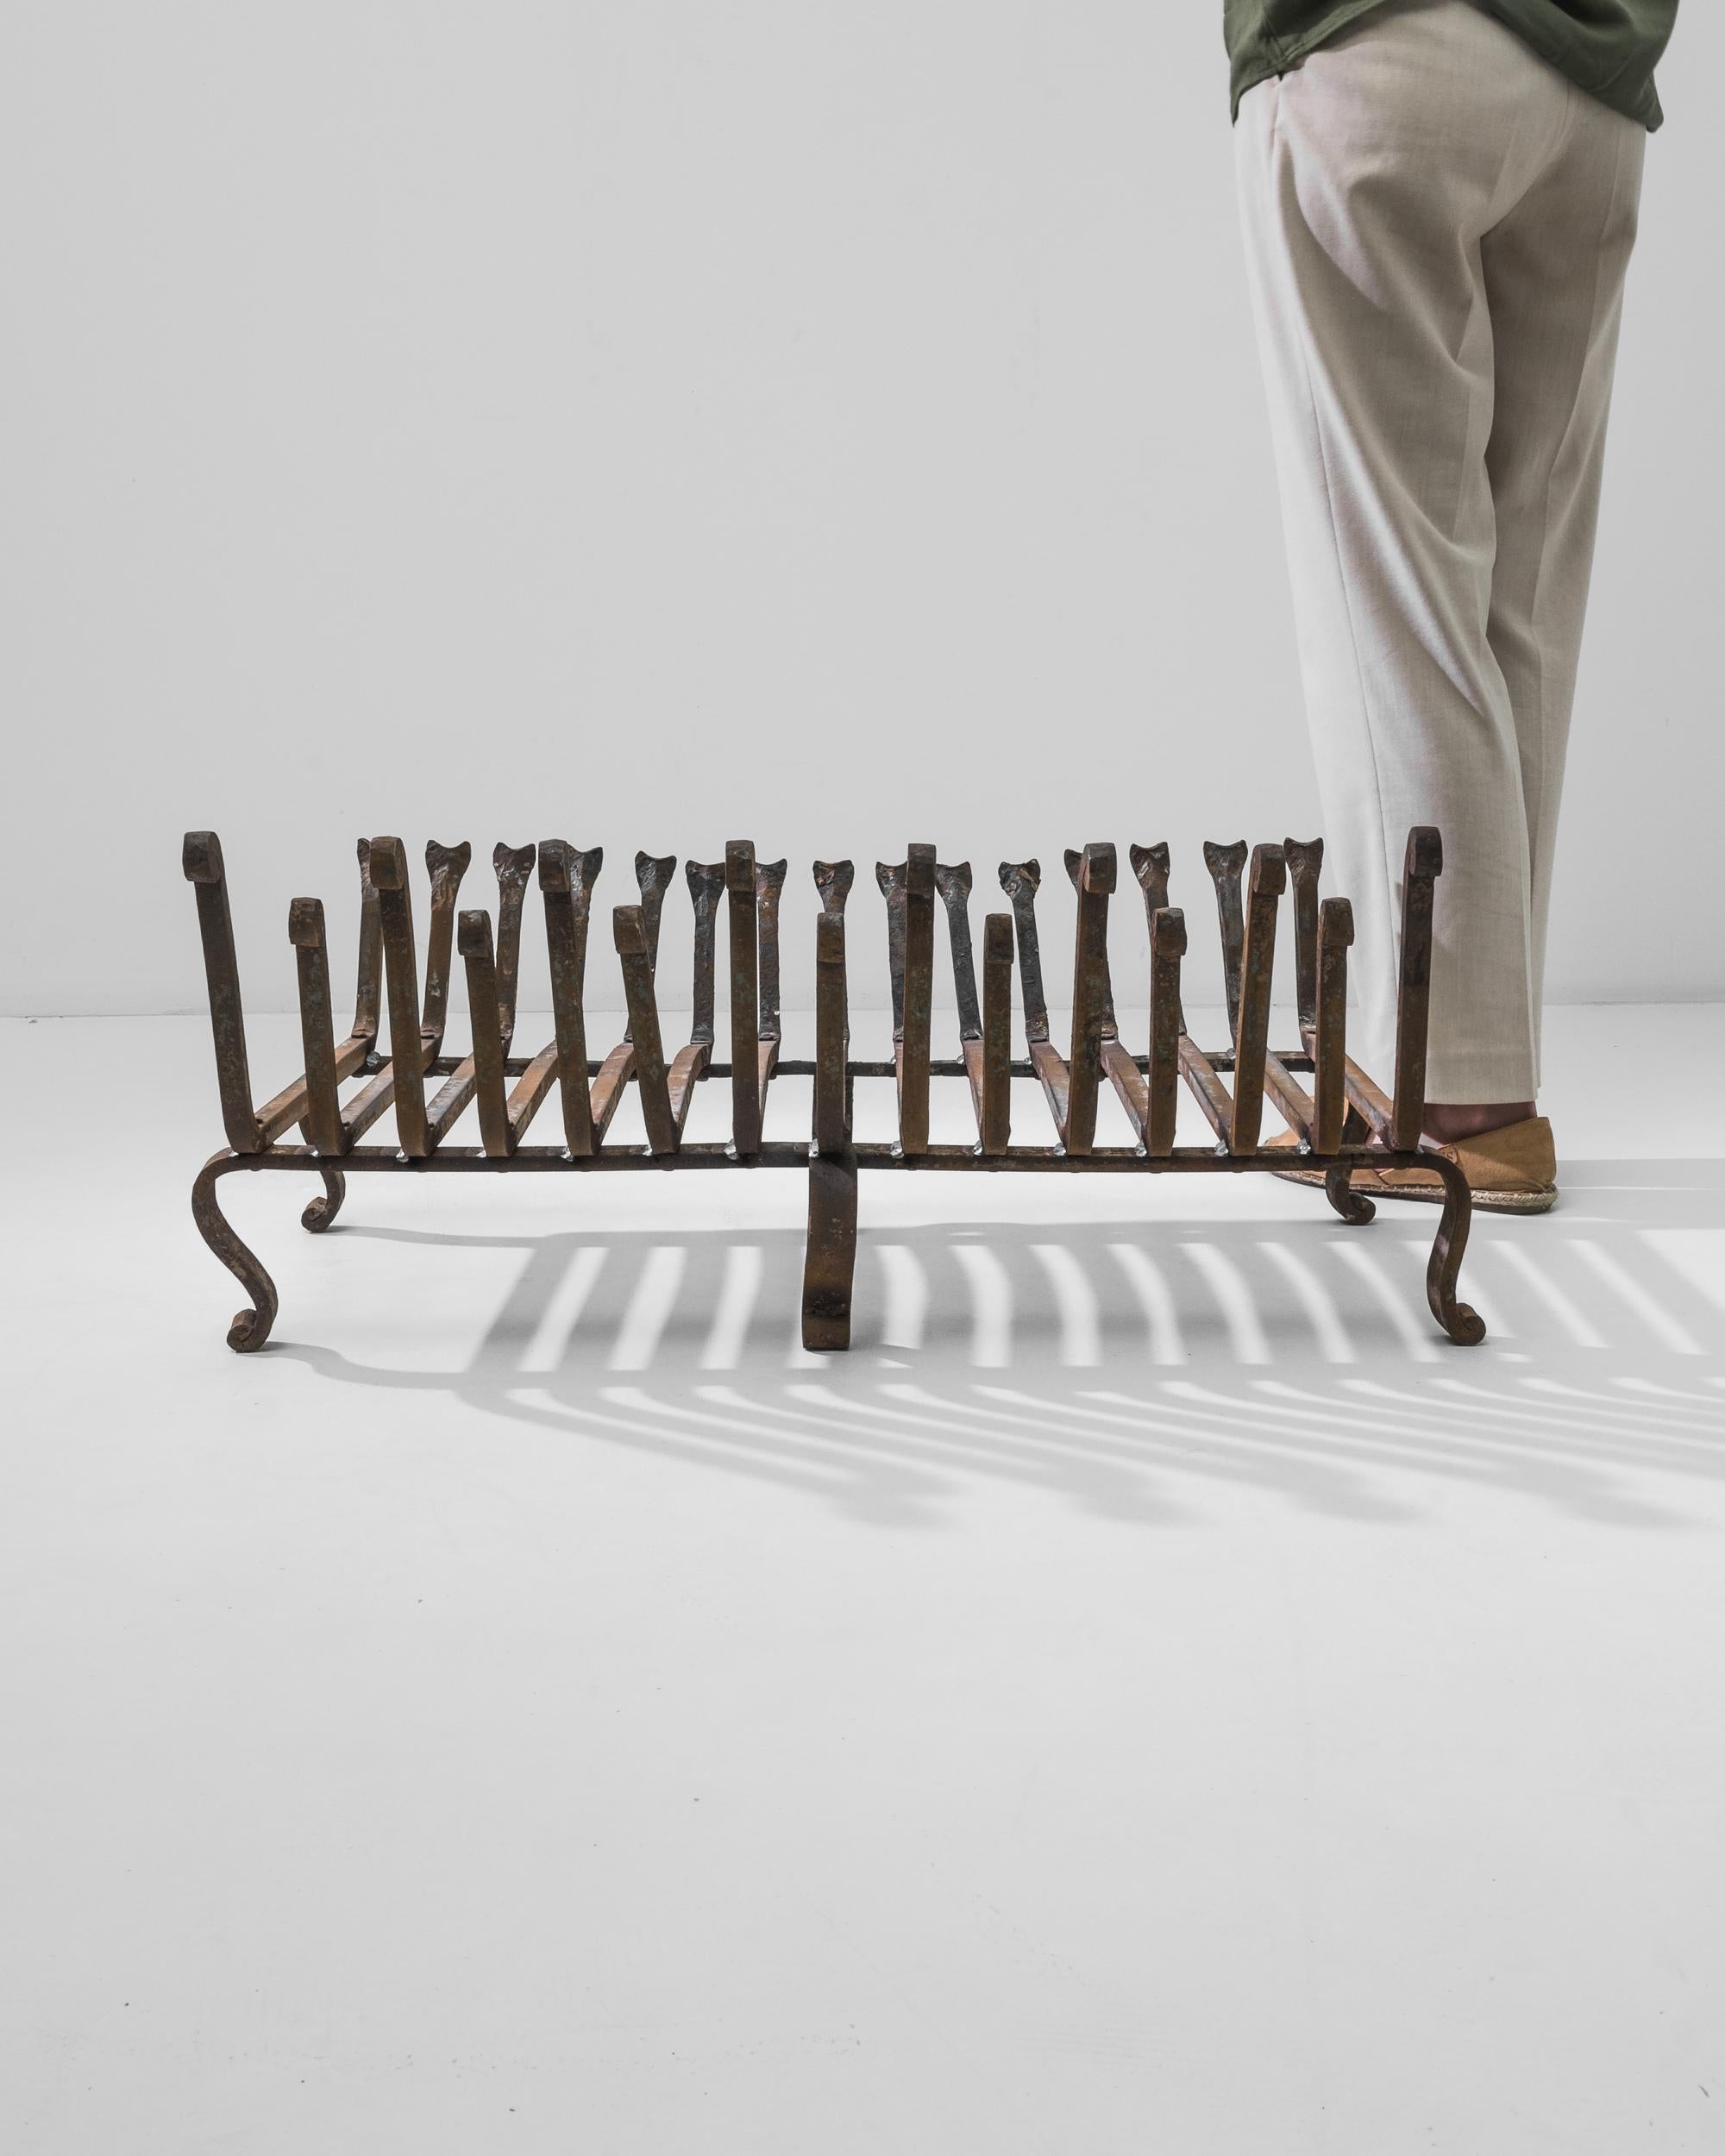 This French iron grate makes a unique centerpiece, evoking the ancient practice of fire-building and the elemental comforts of the hearth. Though made in the 20th Century, the age-old techniques used to craft cast iron give this piece a timeless